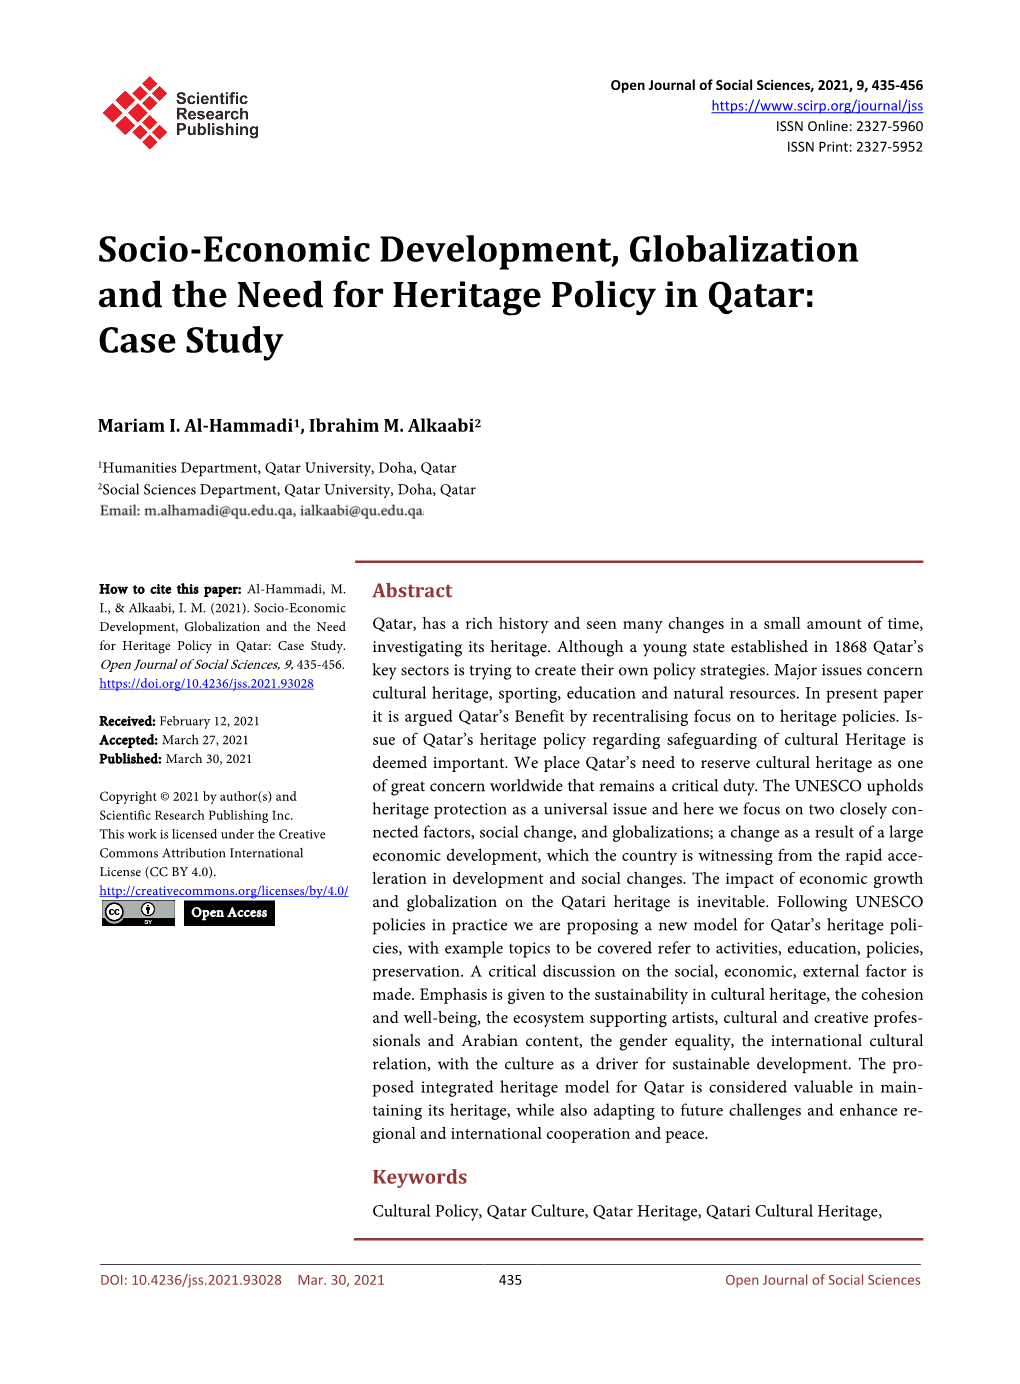 Socio-Economic Development, Globalization and the Need for Heritage Policy in Qatar: Case Study